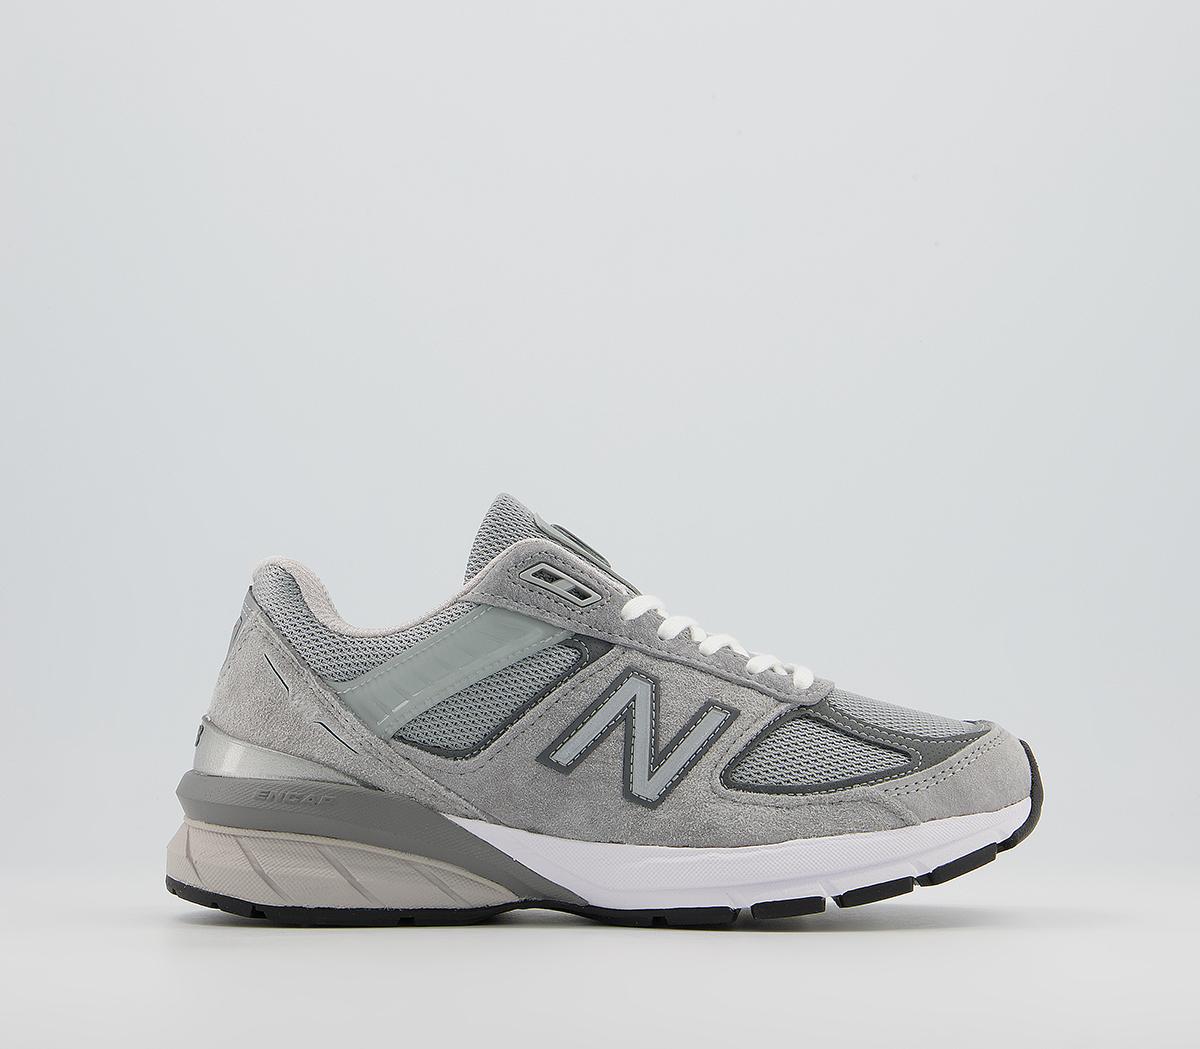 sphere Changes from twist New Balance W990 Trainers Grey Mius - Women's Trainers